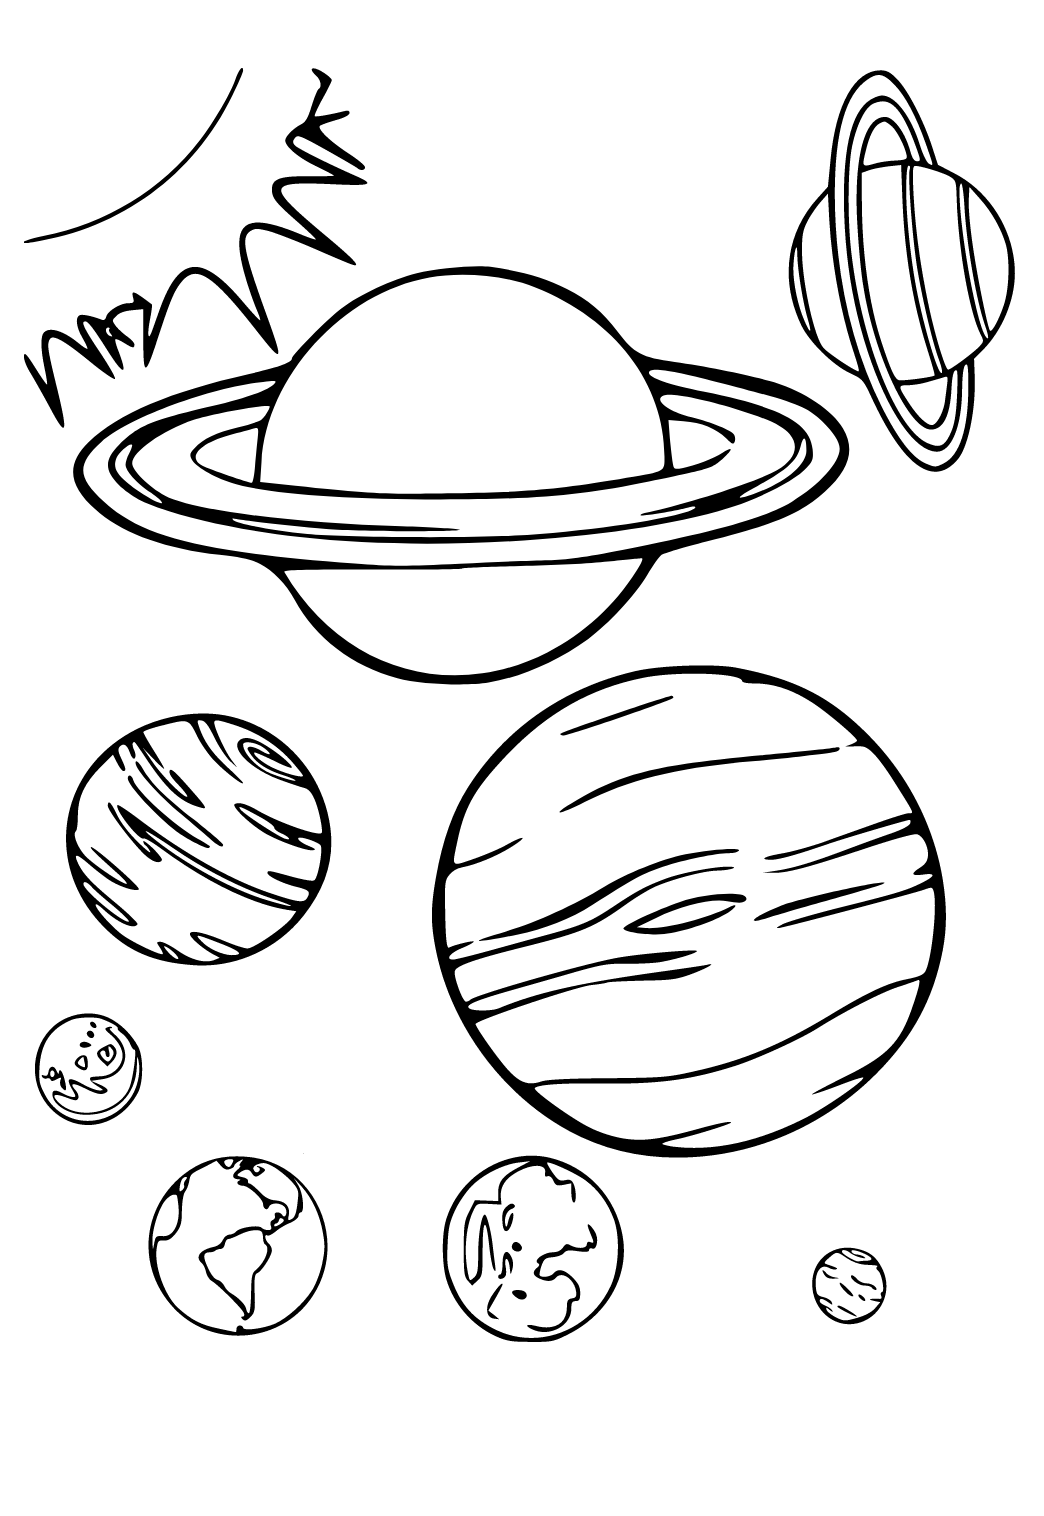 Free printable solar system saturn coloring page for adults and kids